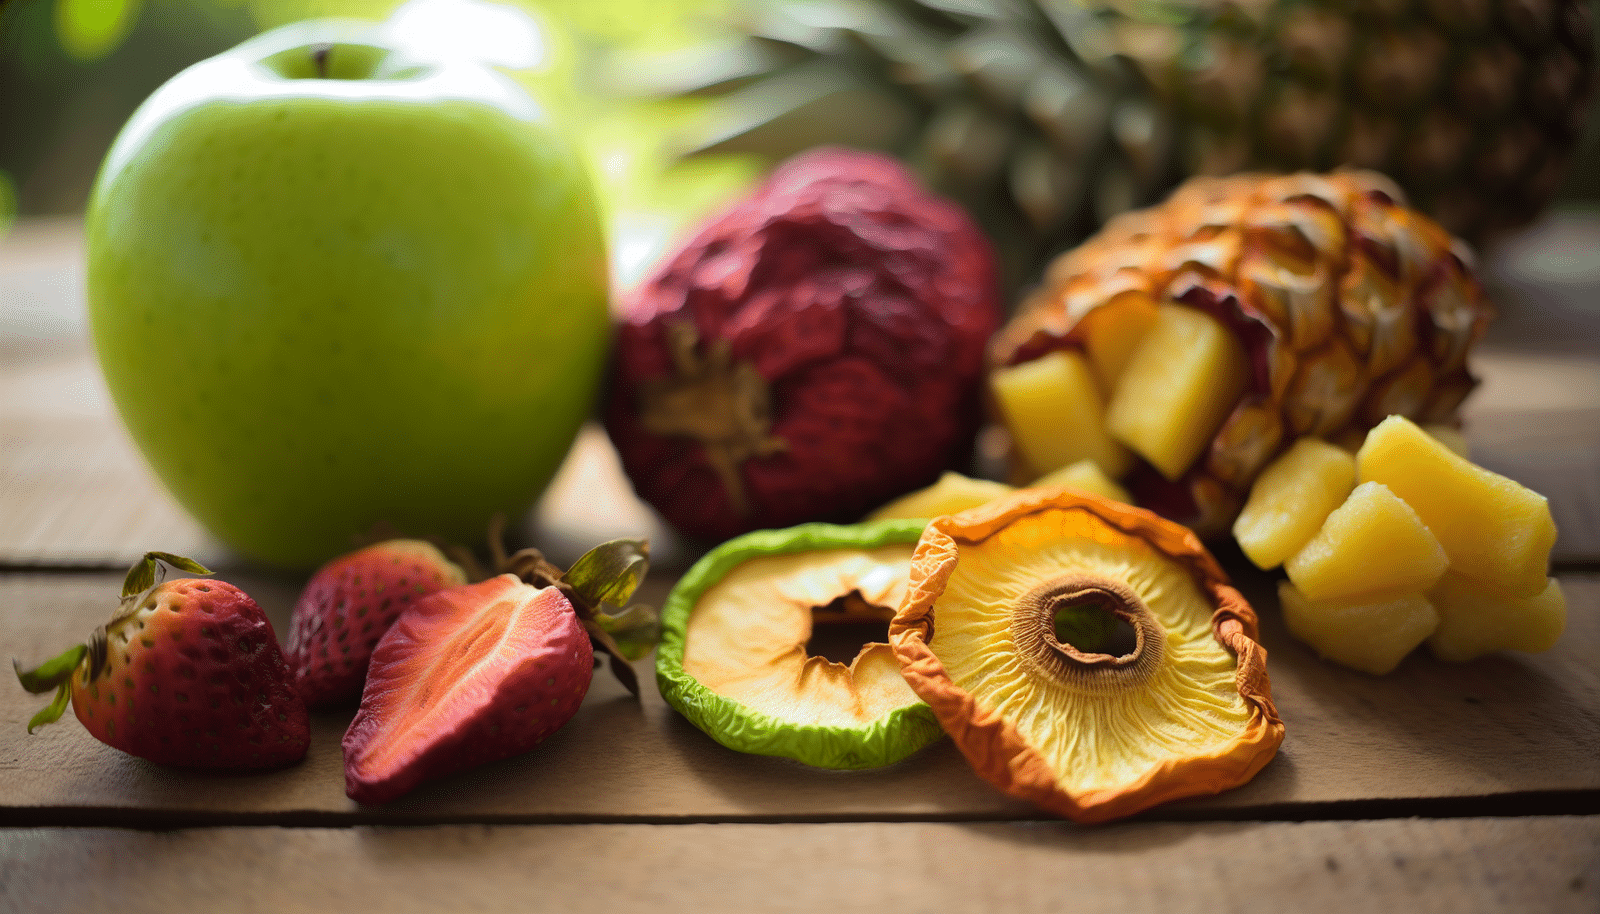 Comparison of fresh and dehydrated fruits